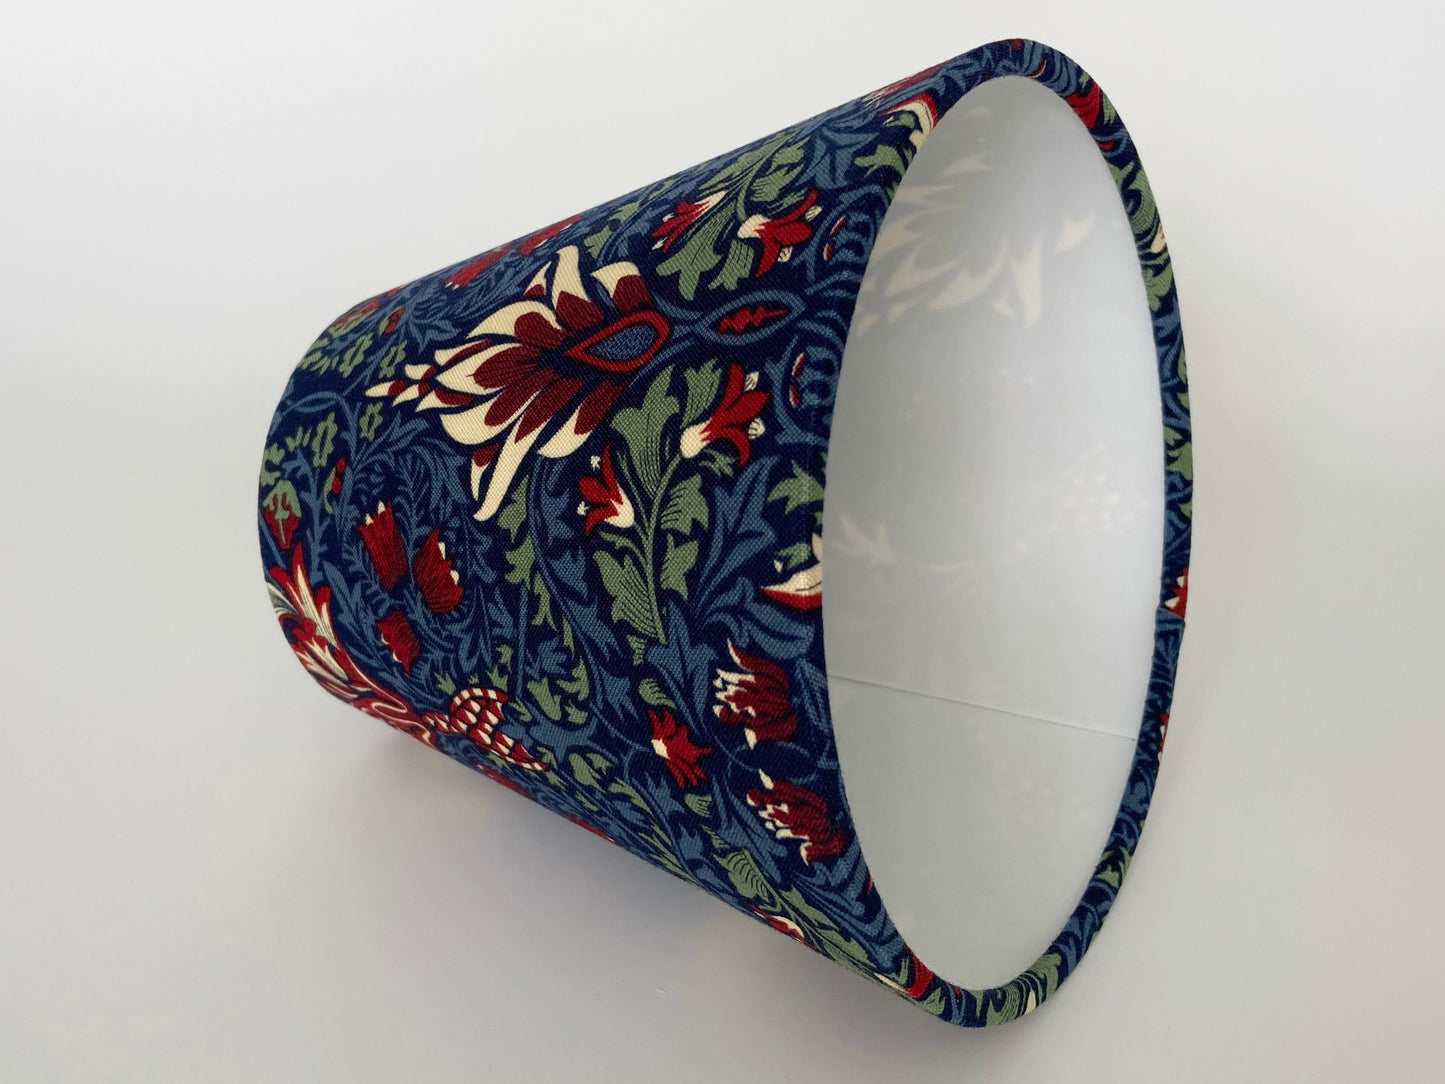 William Morris Blue Snakeshead Fabric Candle Clip Lampshade